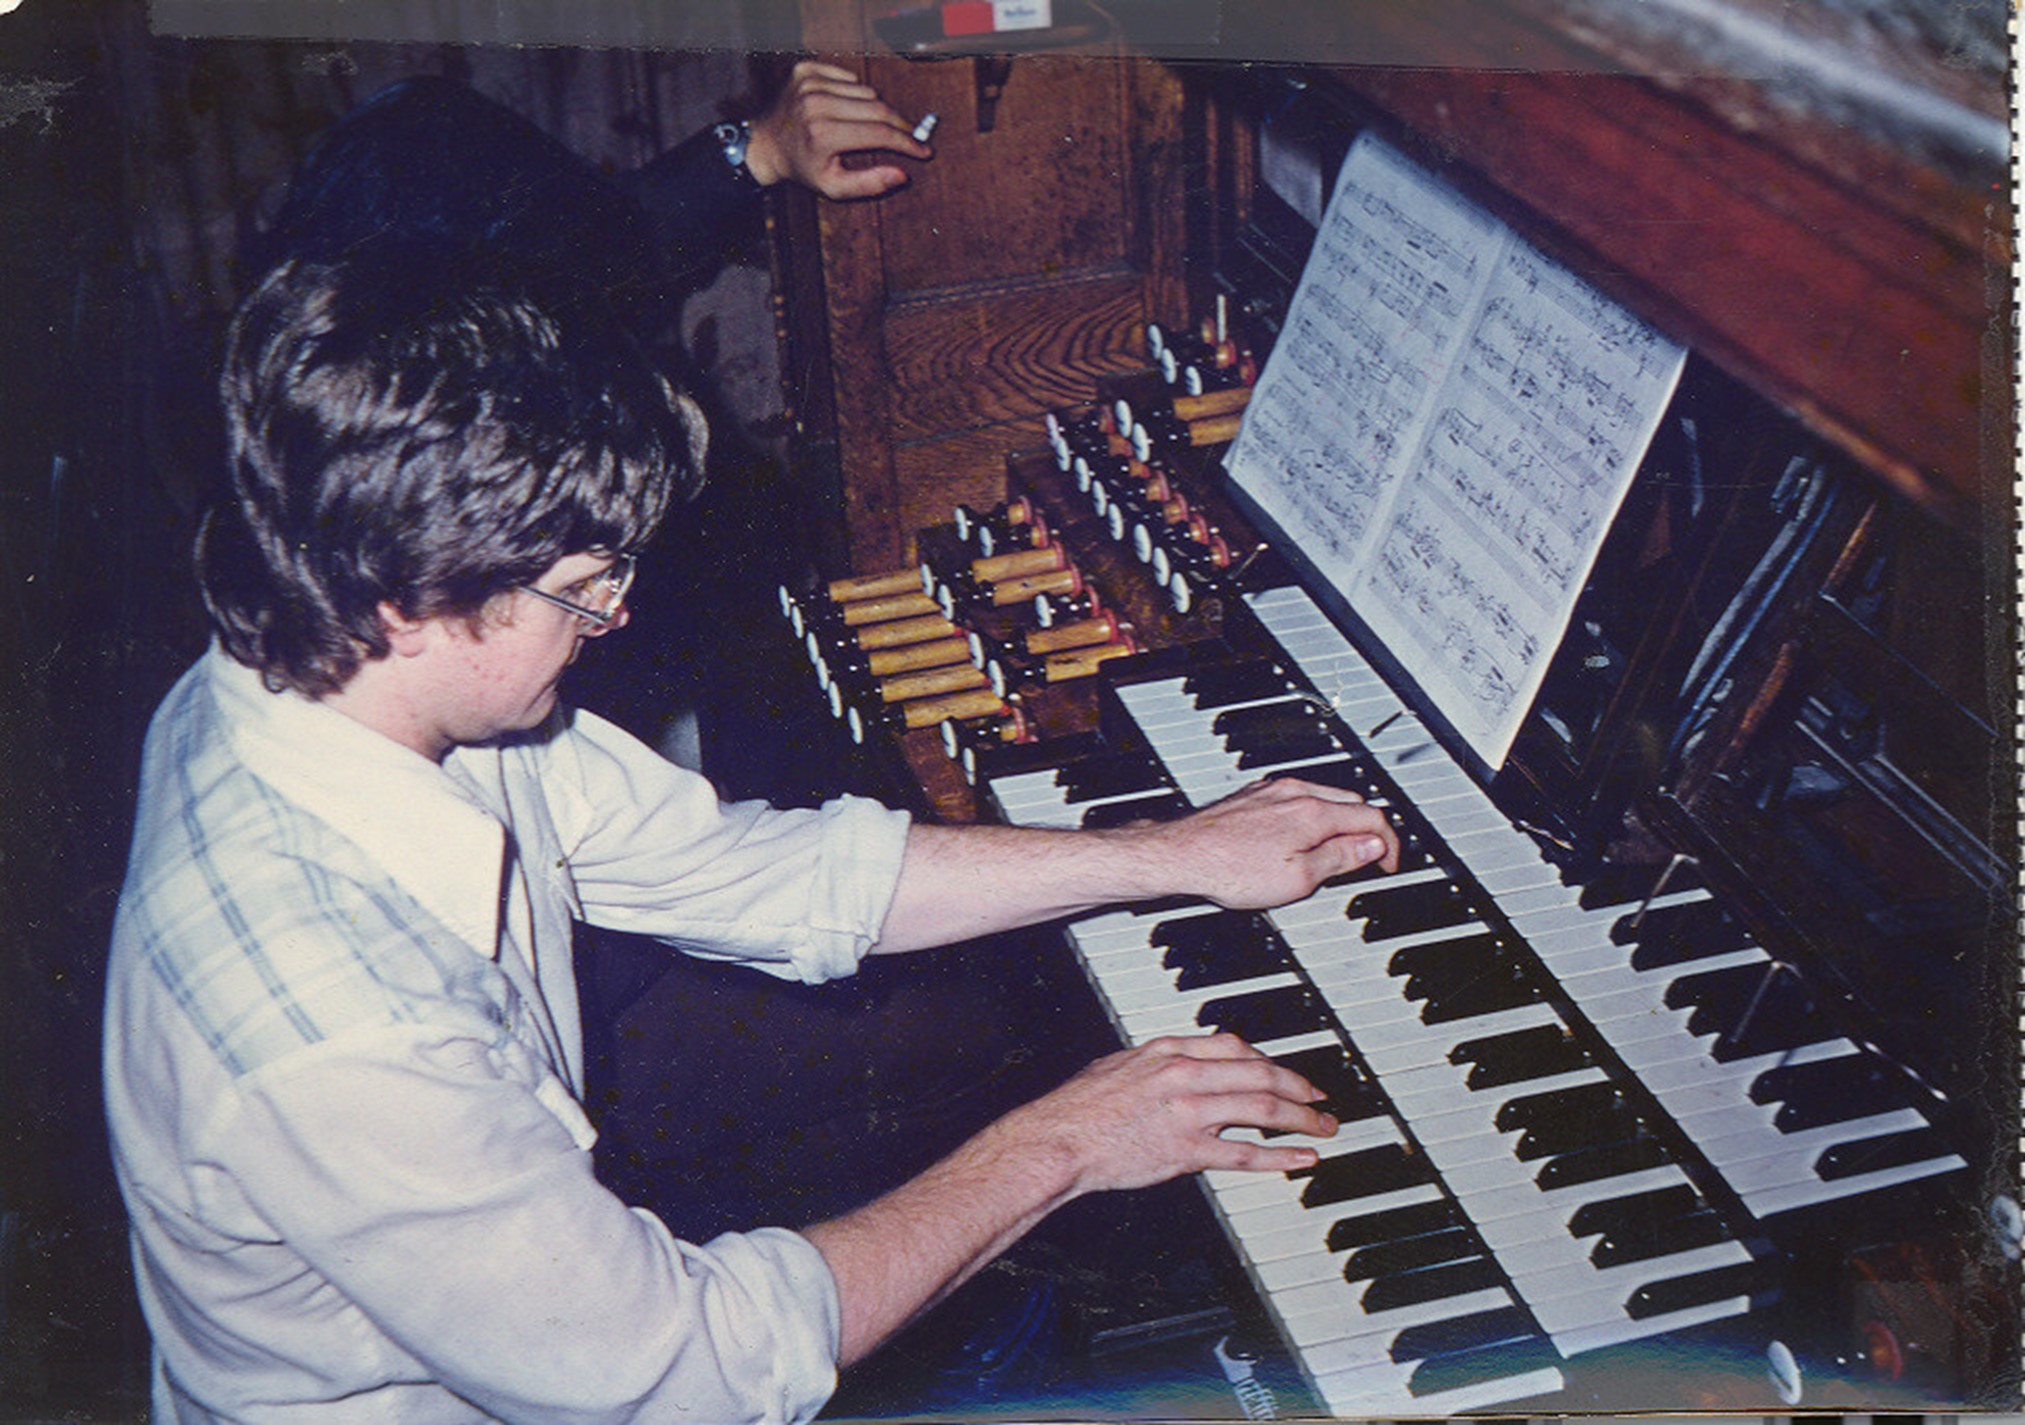 George Baker playing the organ in 1975